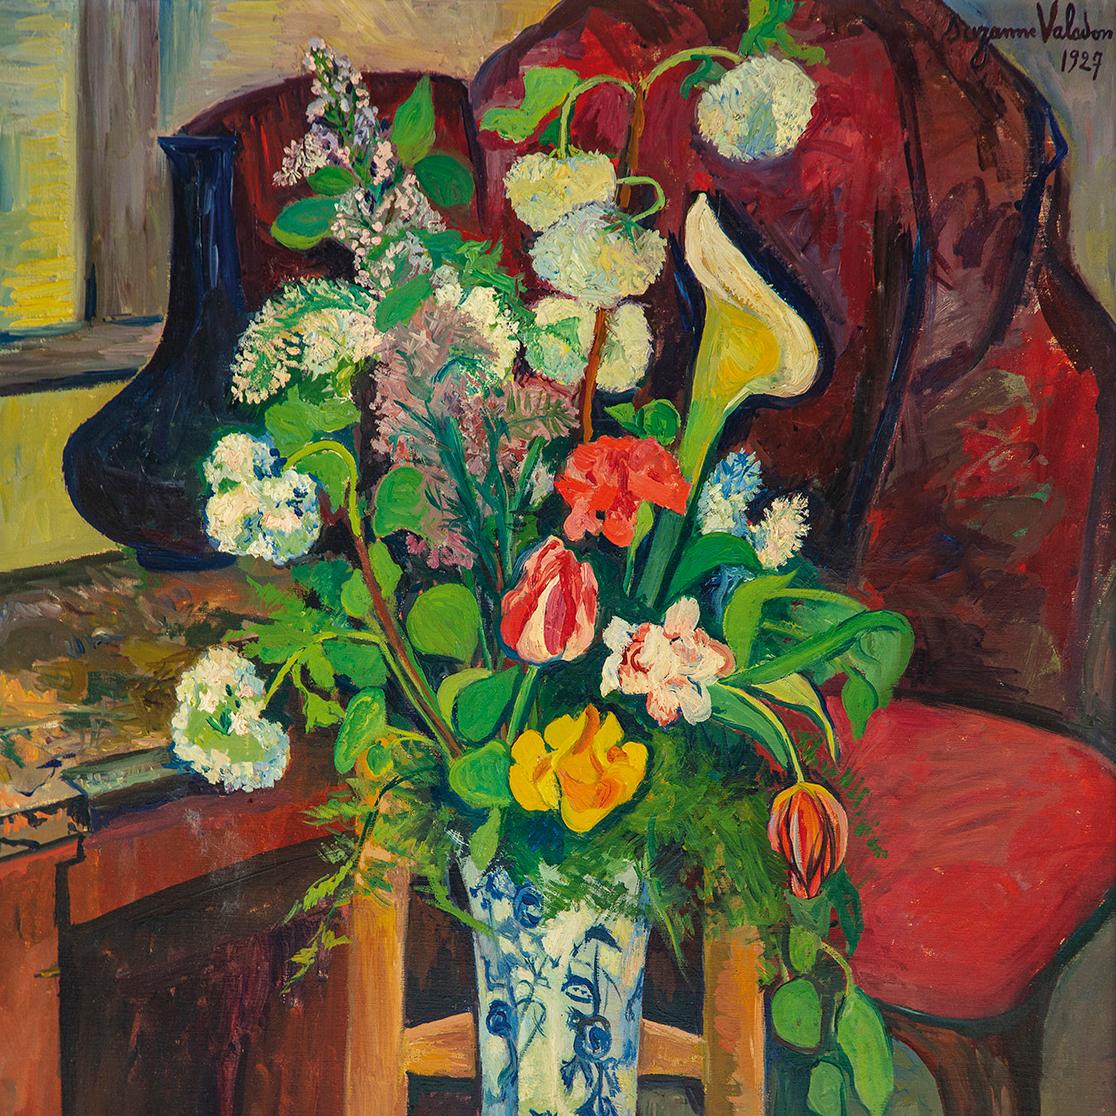 Flowers for Suzanne Valadon